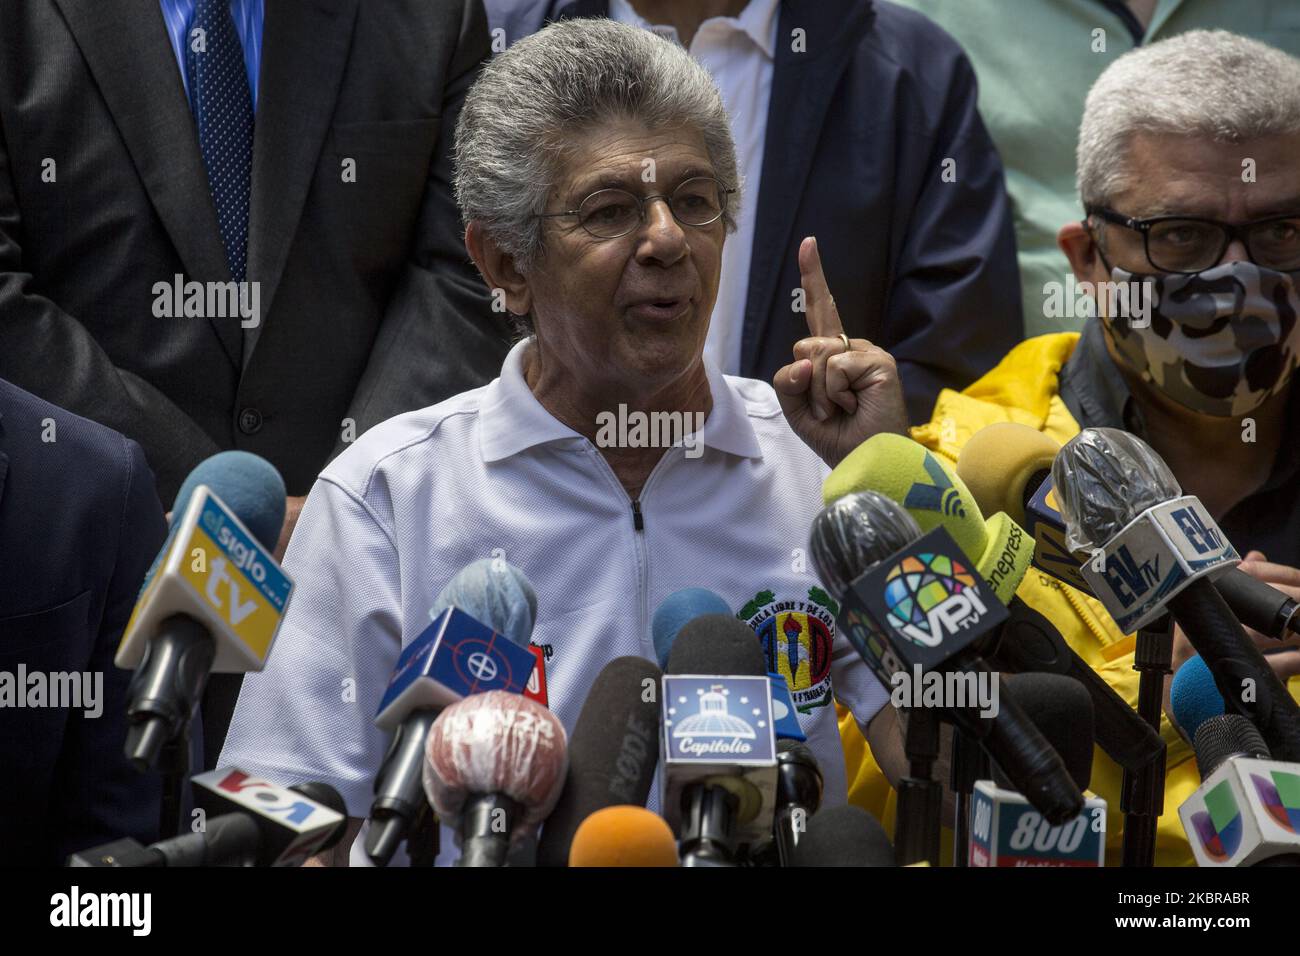 Henry Ramos Allup delivers a press conference at the headquarters of the Accion Democratica (Democratic Action) party in Caracas on June 17, 2020. Juan Guaido accused the government of trying to manipulate the upcoming elections after naming a new electoral authority favorable to the regime and ordering the intervention of opposition parties. (Photo by Rafael Briceno Sierralta/NurPhoto) Stock Photo